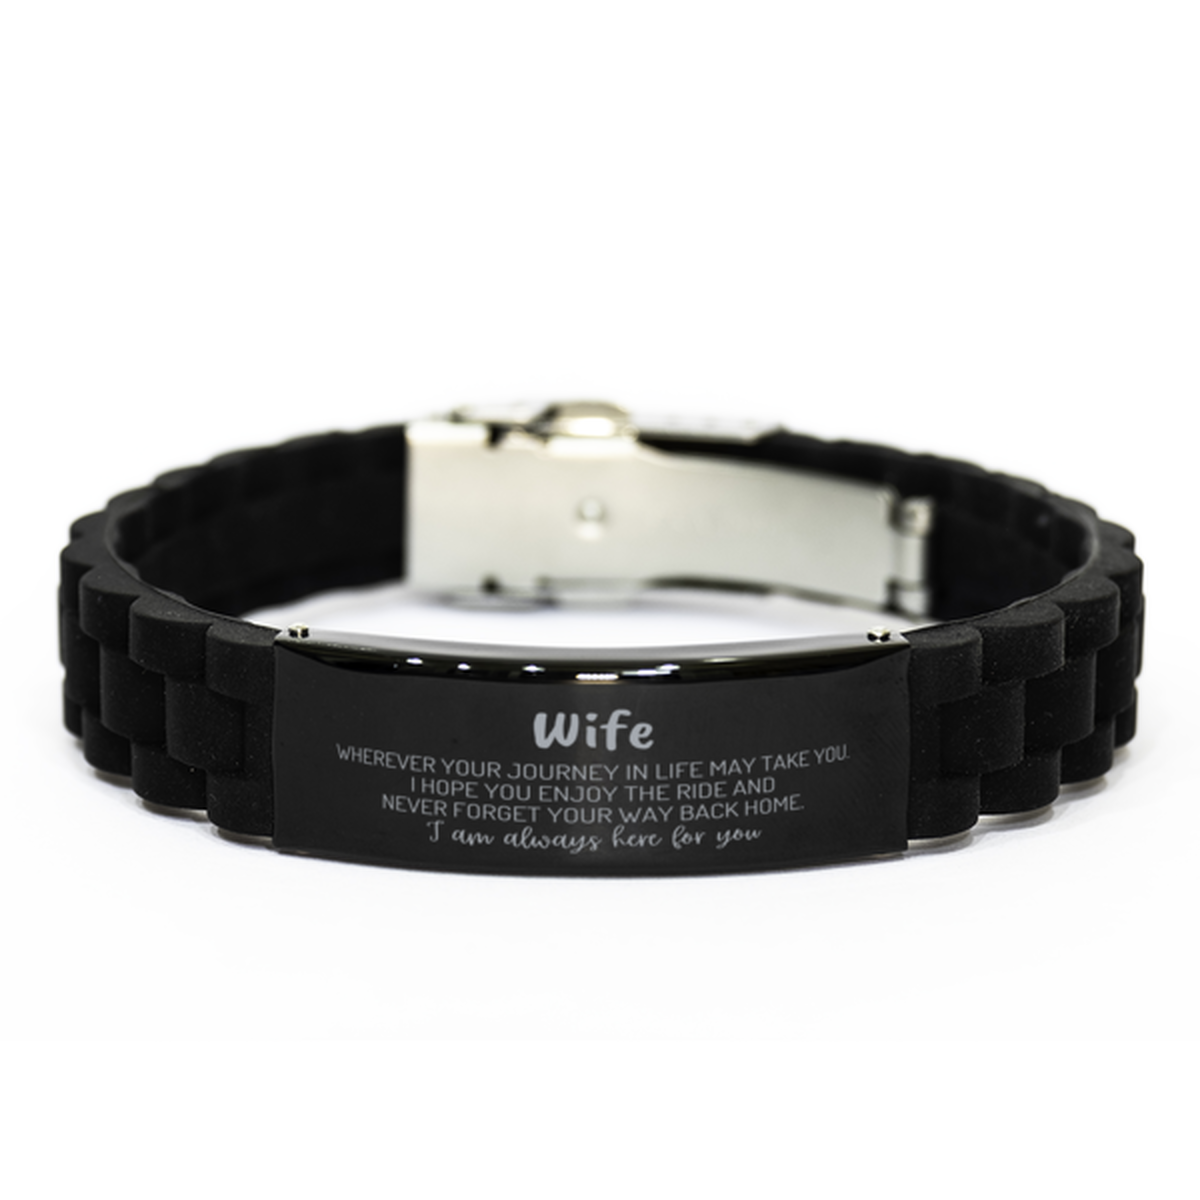 Wife wherever your journey in life may take you, I am always here for you Wife Black Glidelock Clasp Bracelet, Awesome Christmas Gifts For Wife, Wife Birthday Gifts for Men Women Family Loved One